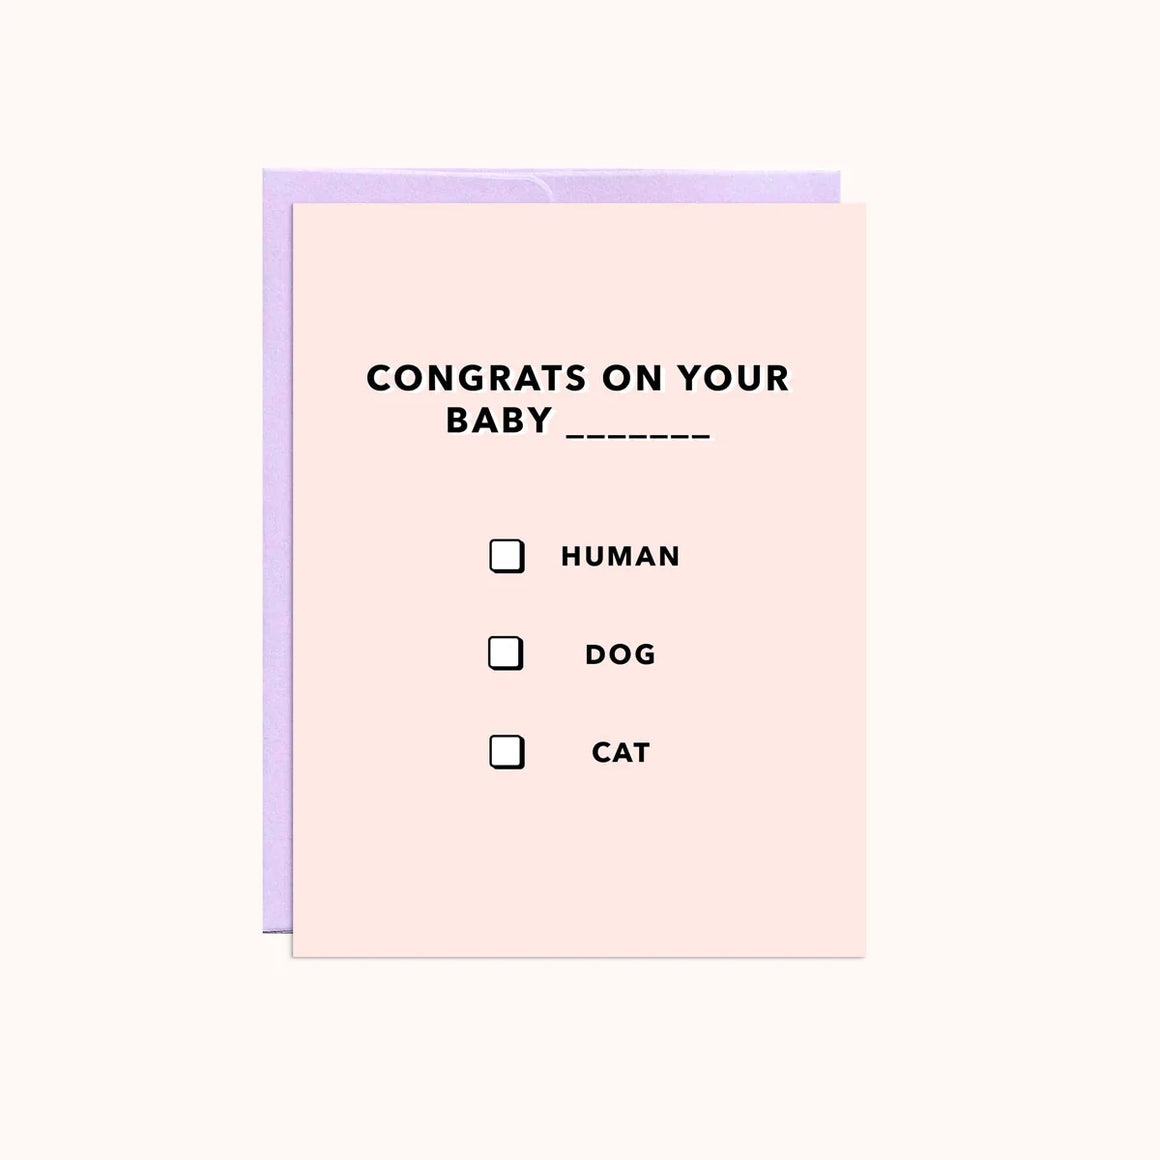 Baby Multiple Choice Greeting Card